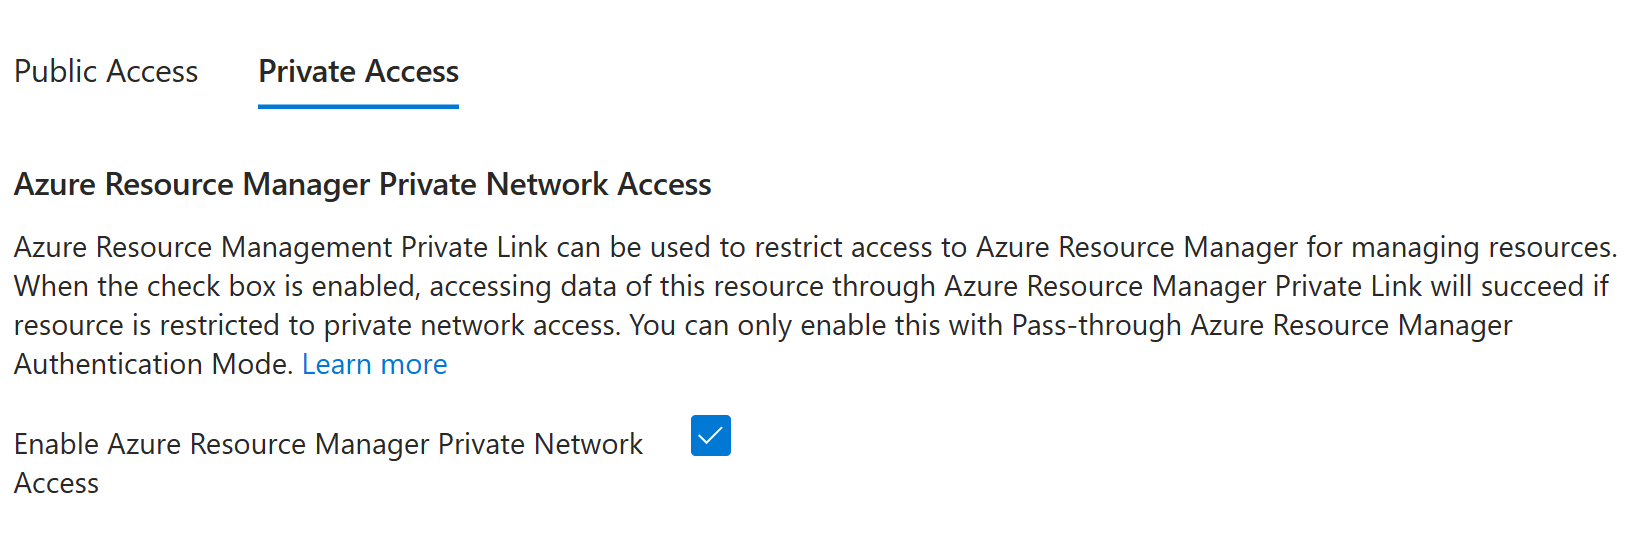 Screenshot showing Enable Azure Resource Manager Private Access is checked.